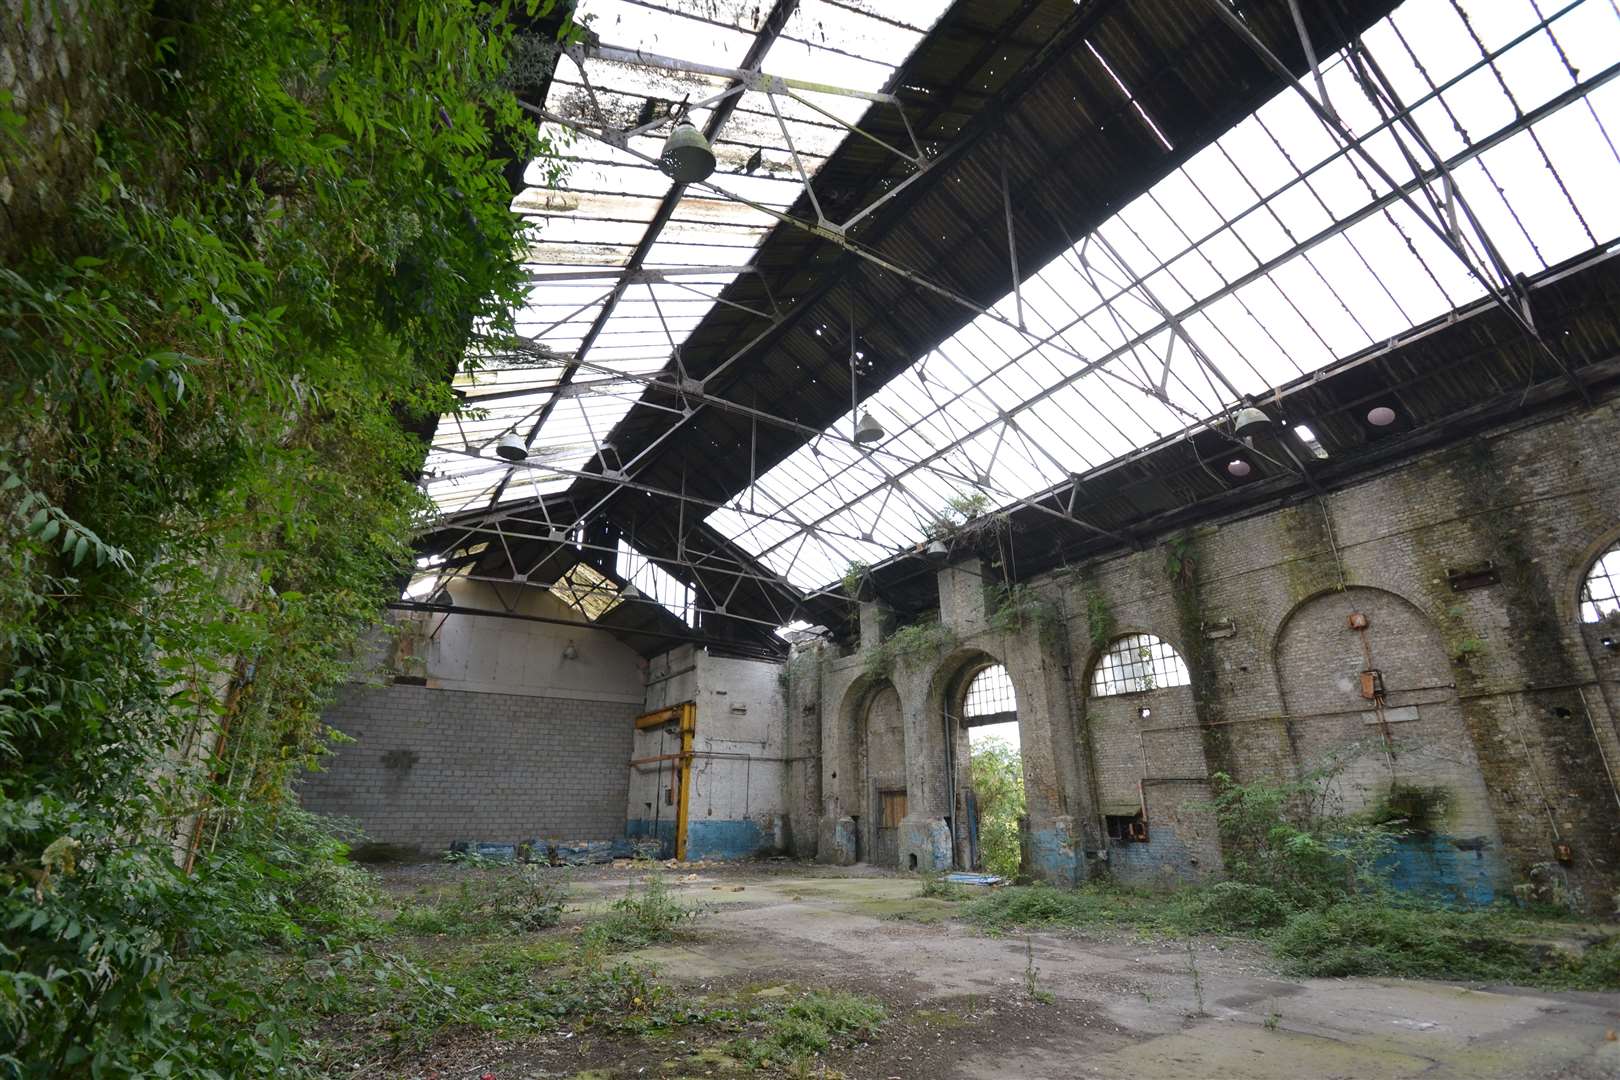 Nature has begun to encroach on the main locomotive shed